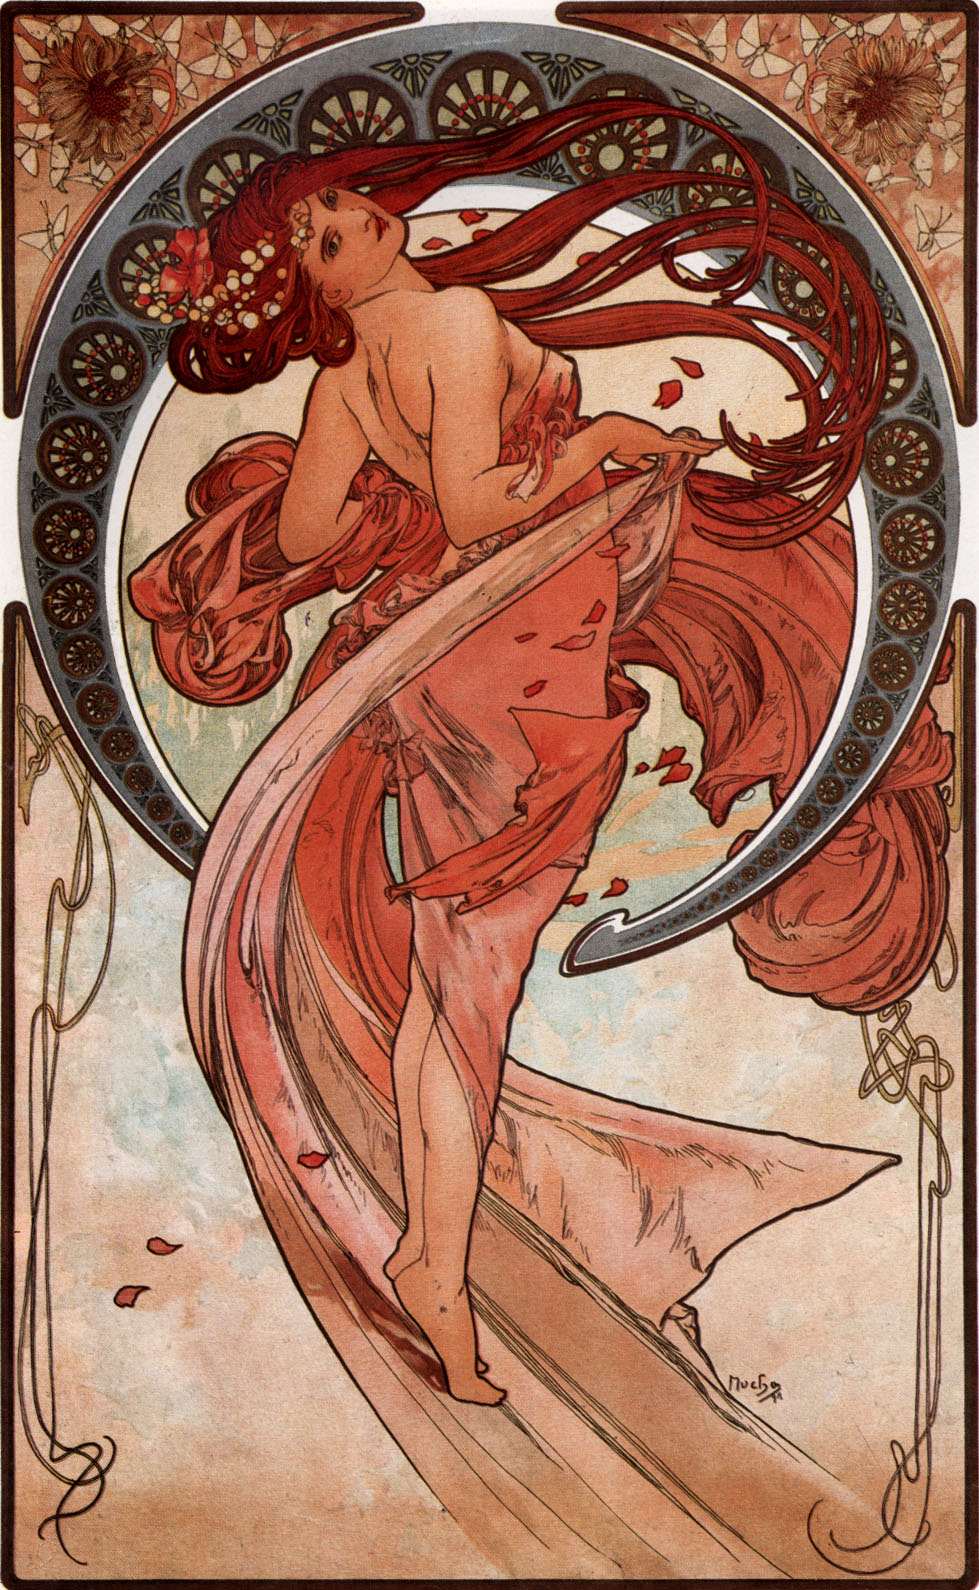 Dance by Alphonse Mucha - 1898 - 60 x 38 cm private collection